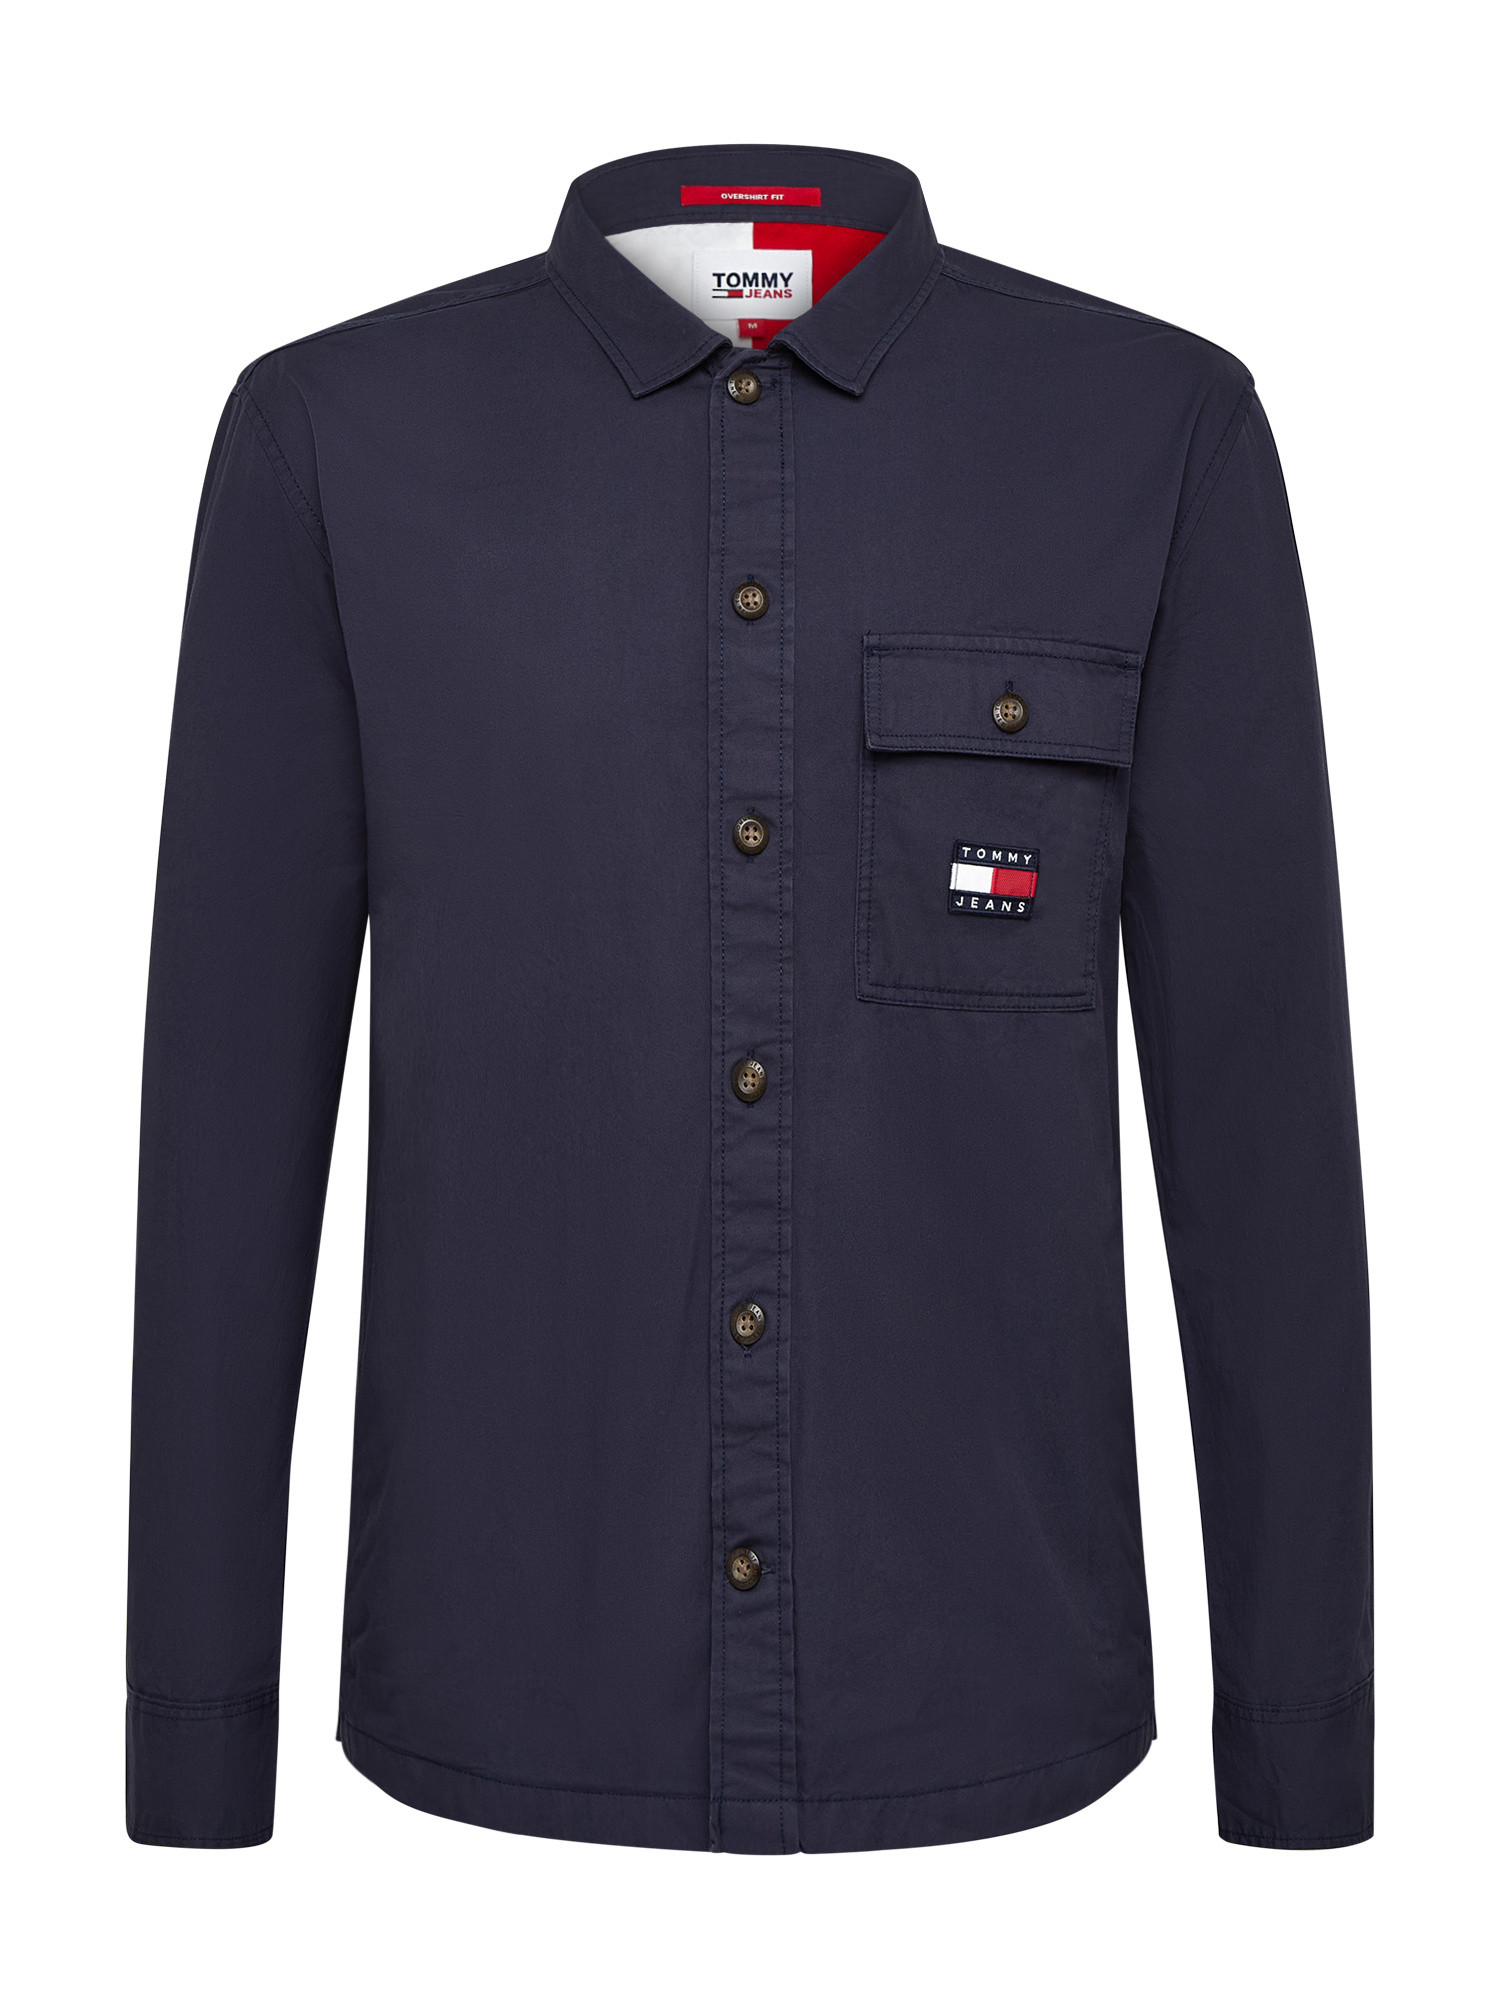 Tommy Jeans -Camicia in cotone con logo, Blu scuro, large image number 0